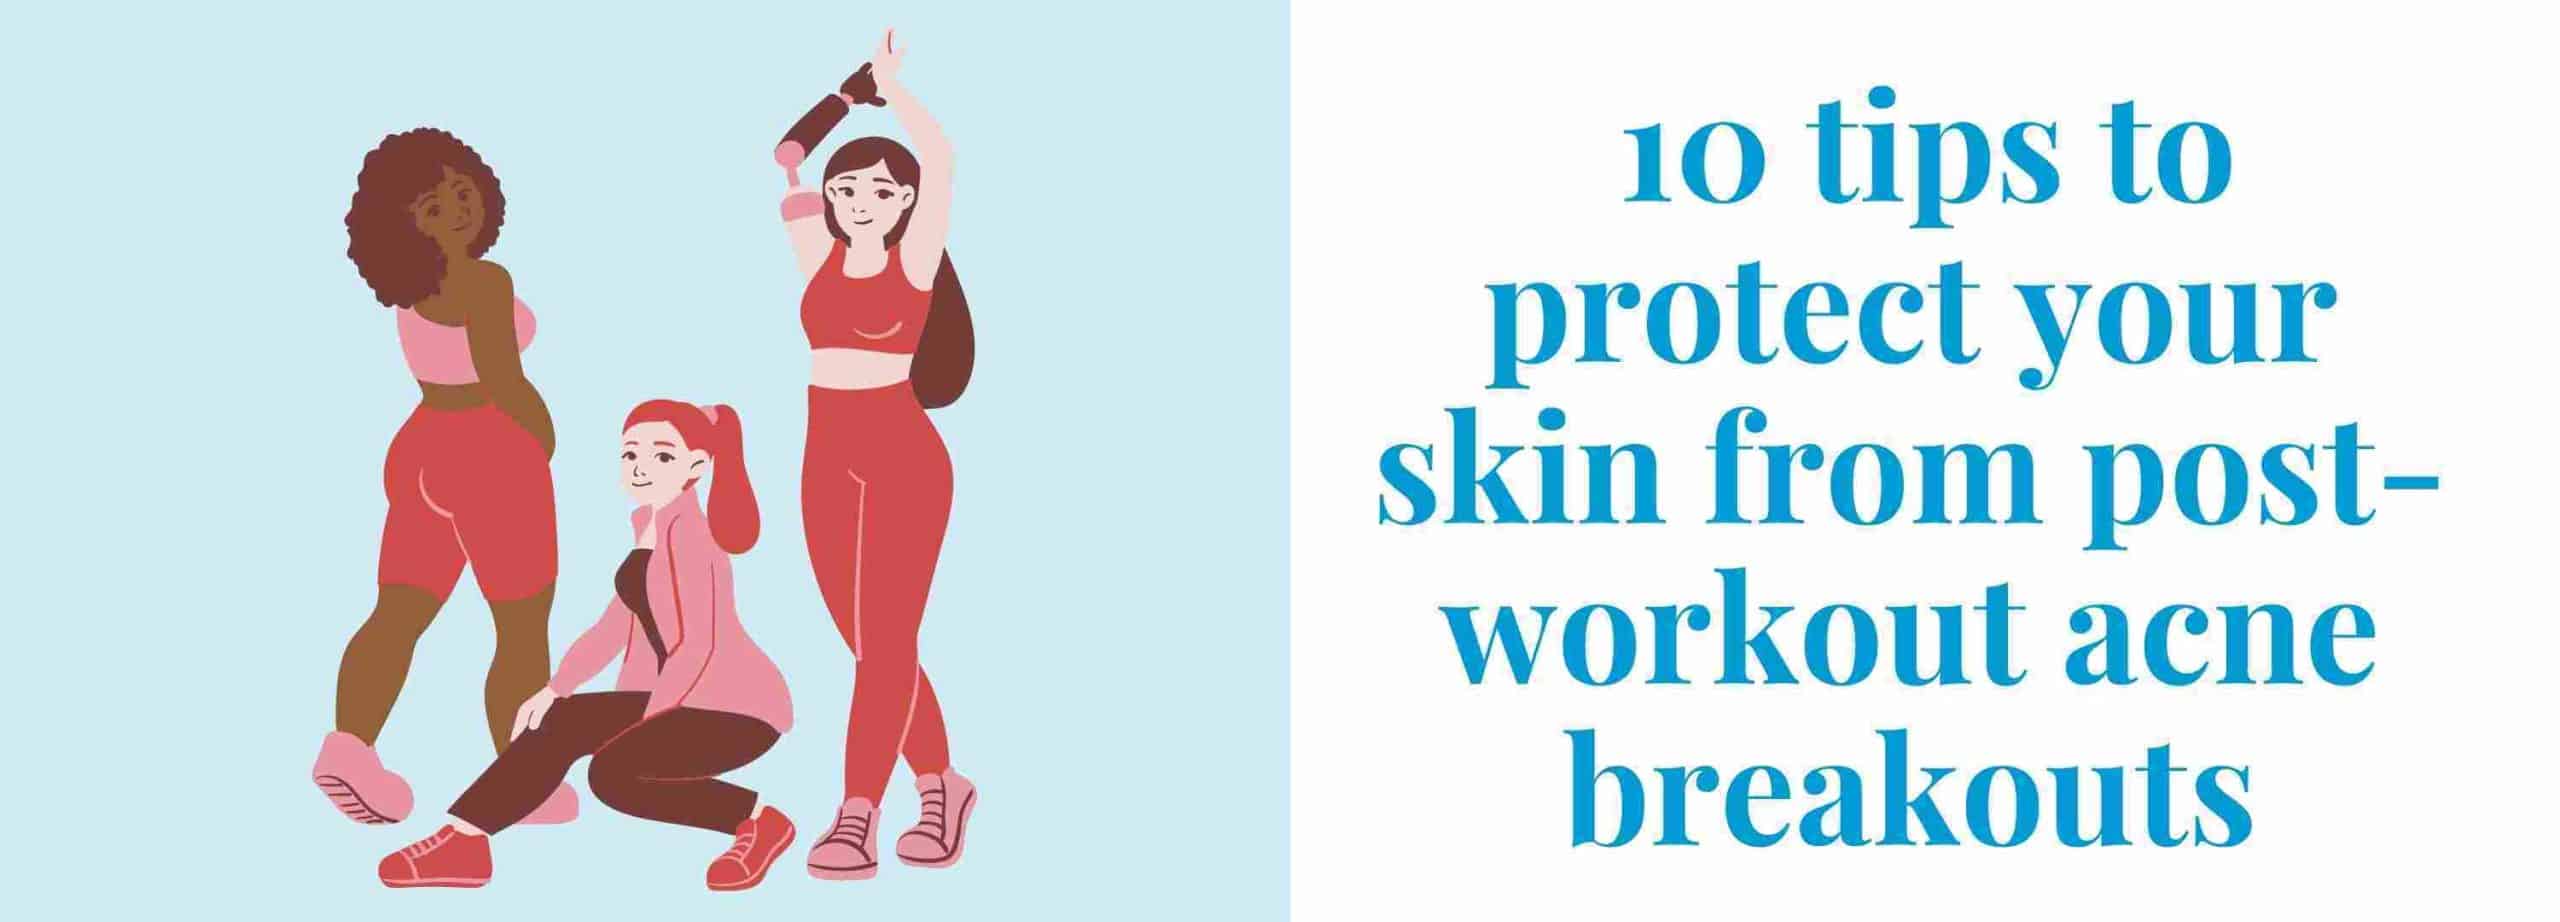 10 tips to protect your skin from post-workout breakouts